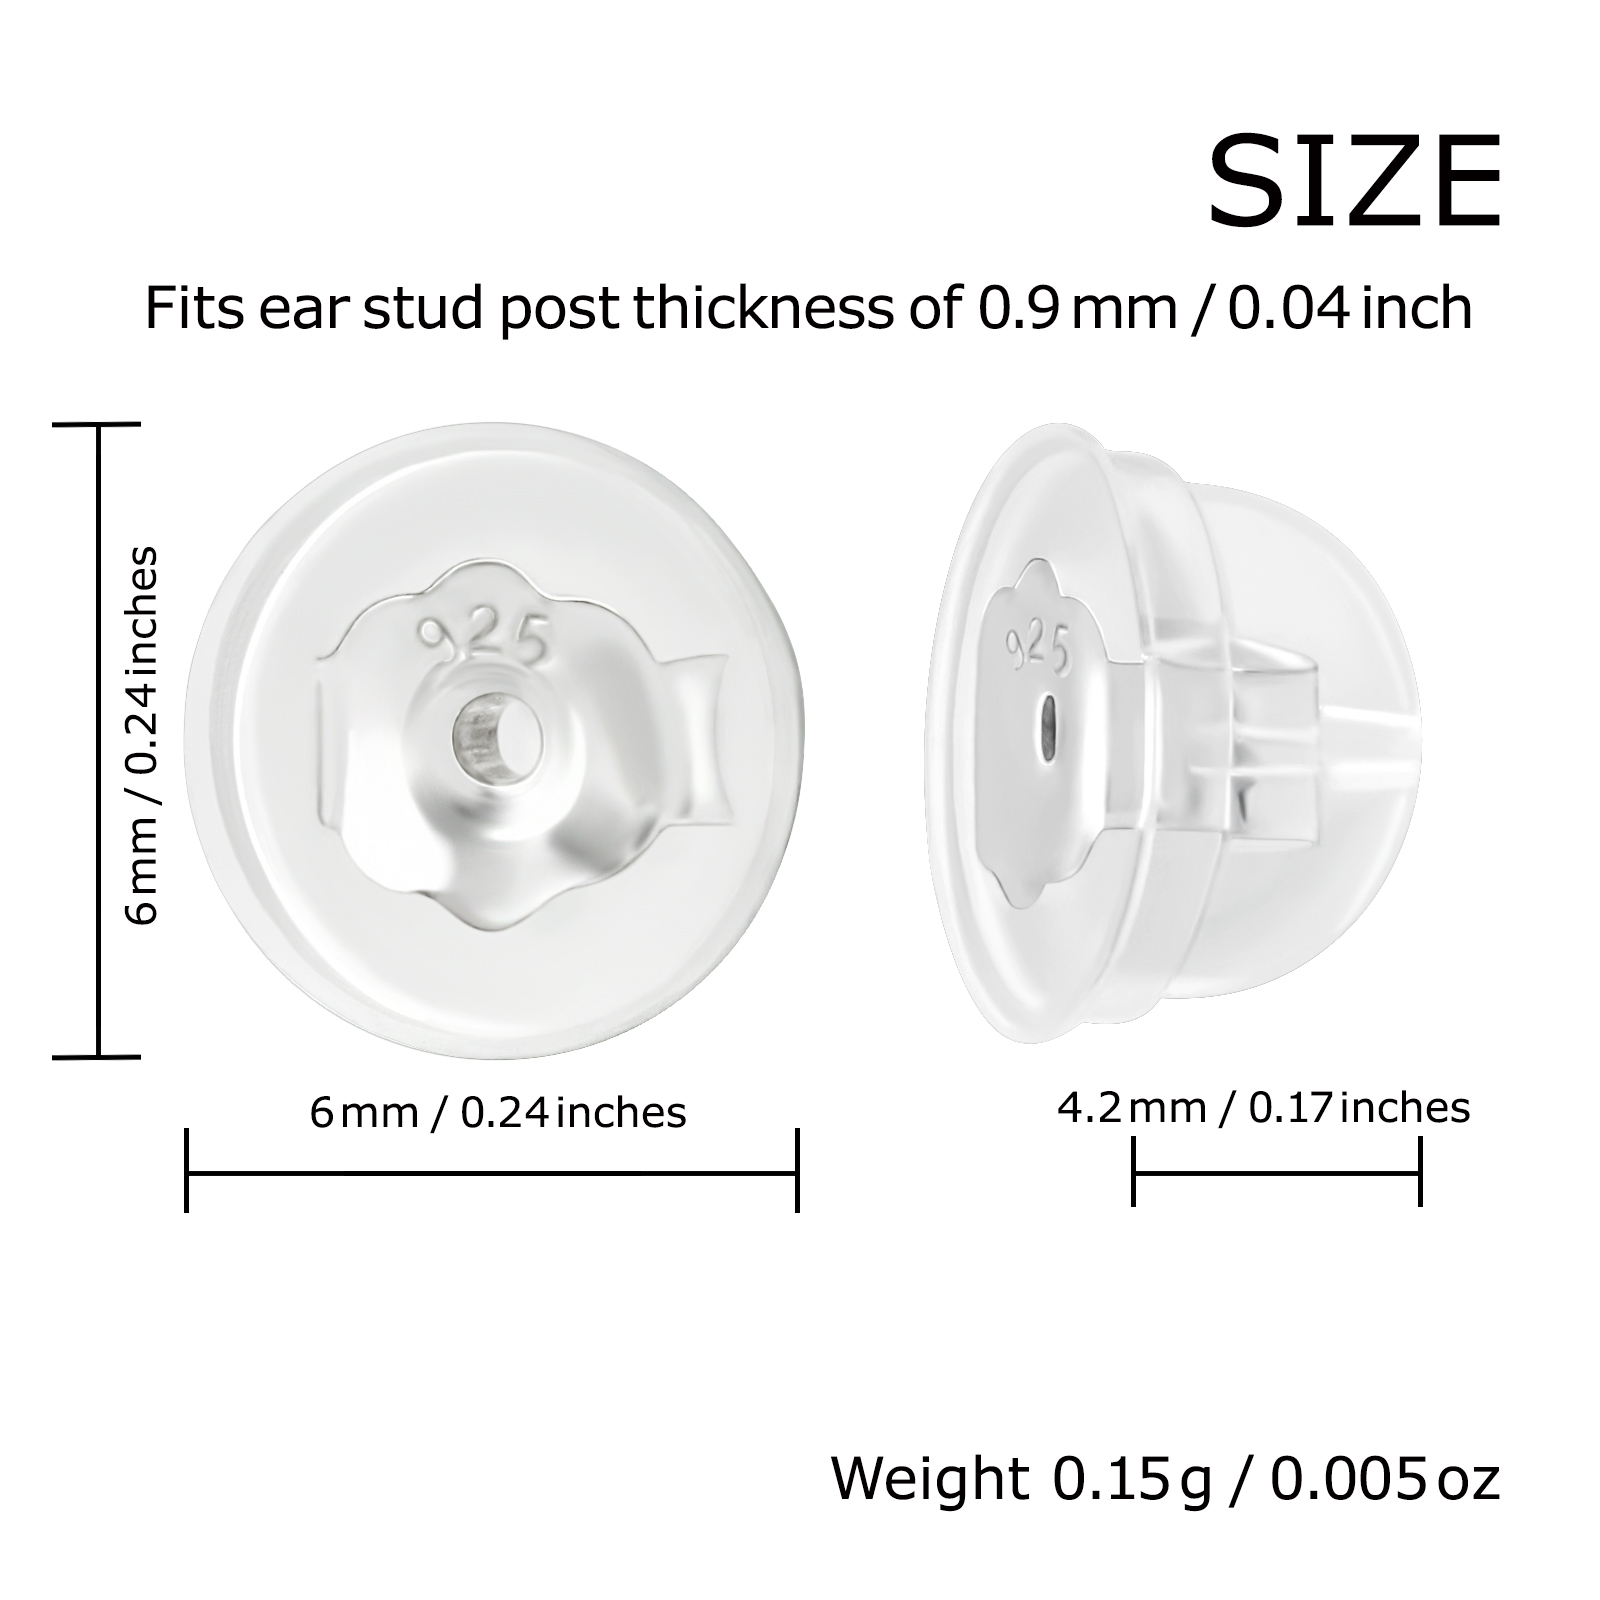 Earring Backs Coated with Soft Clear Silicone 3 Pairs - Aube Jewelry